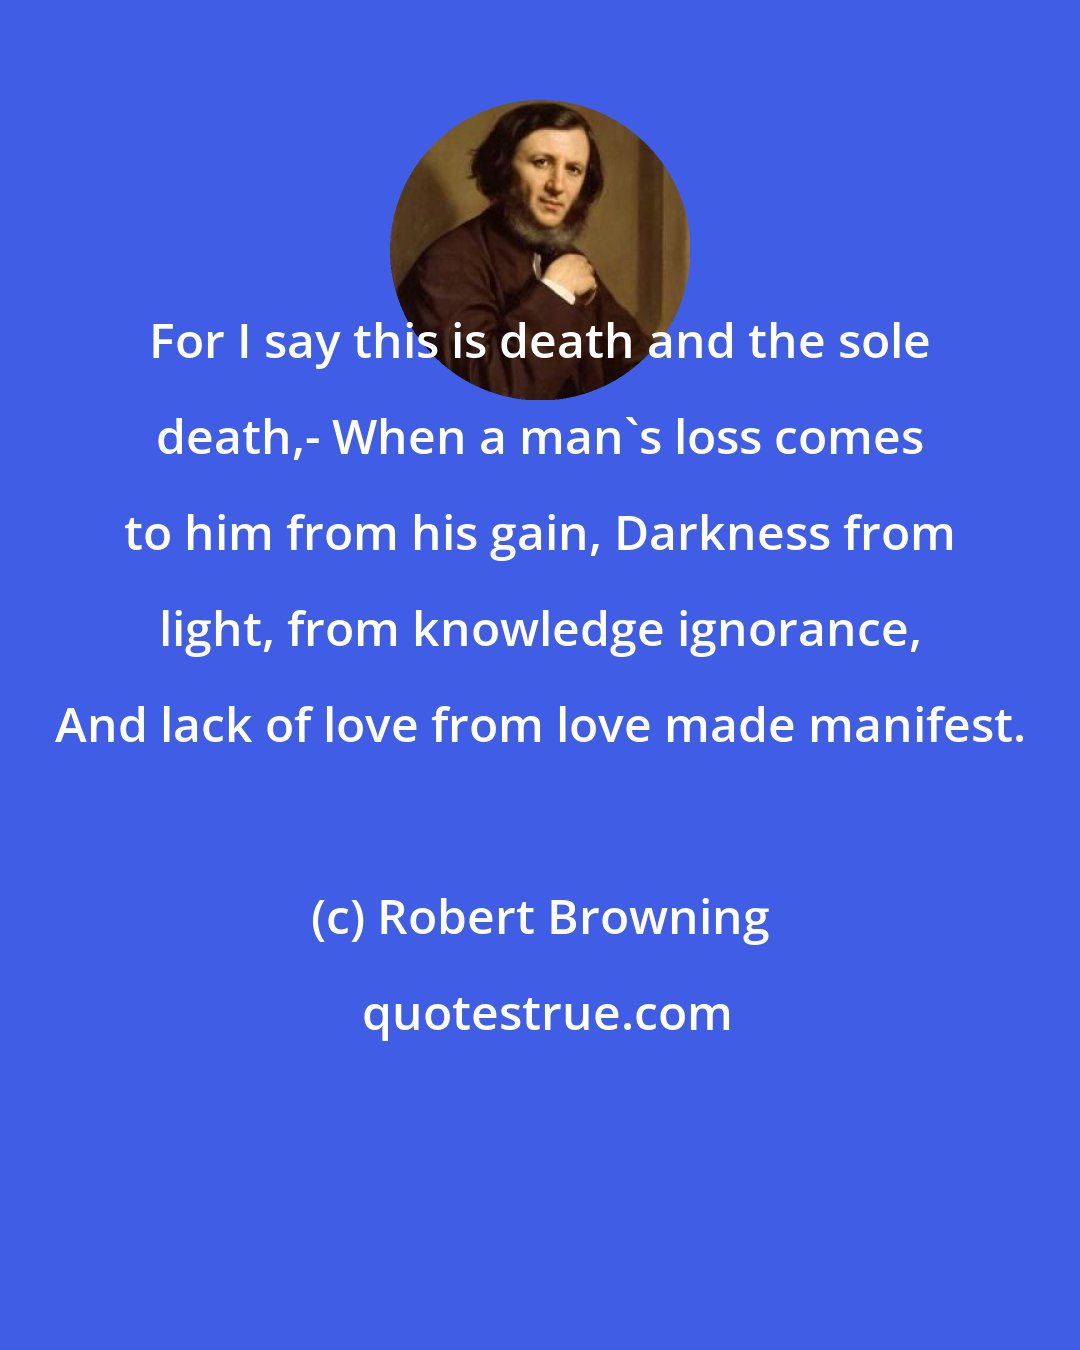 Robert Browning: For I say this is death and the sole death,- When a man's loss comes to him from his gain, Darkness from light, from knowledge ignorance, And lack of love from love made manifest.